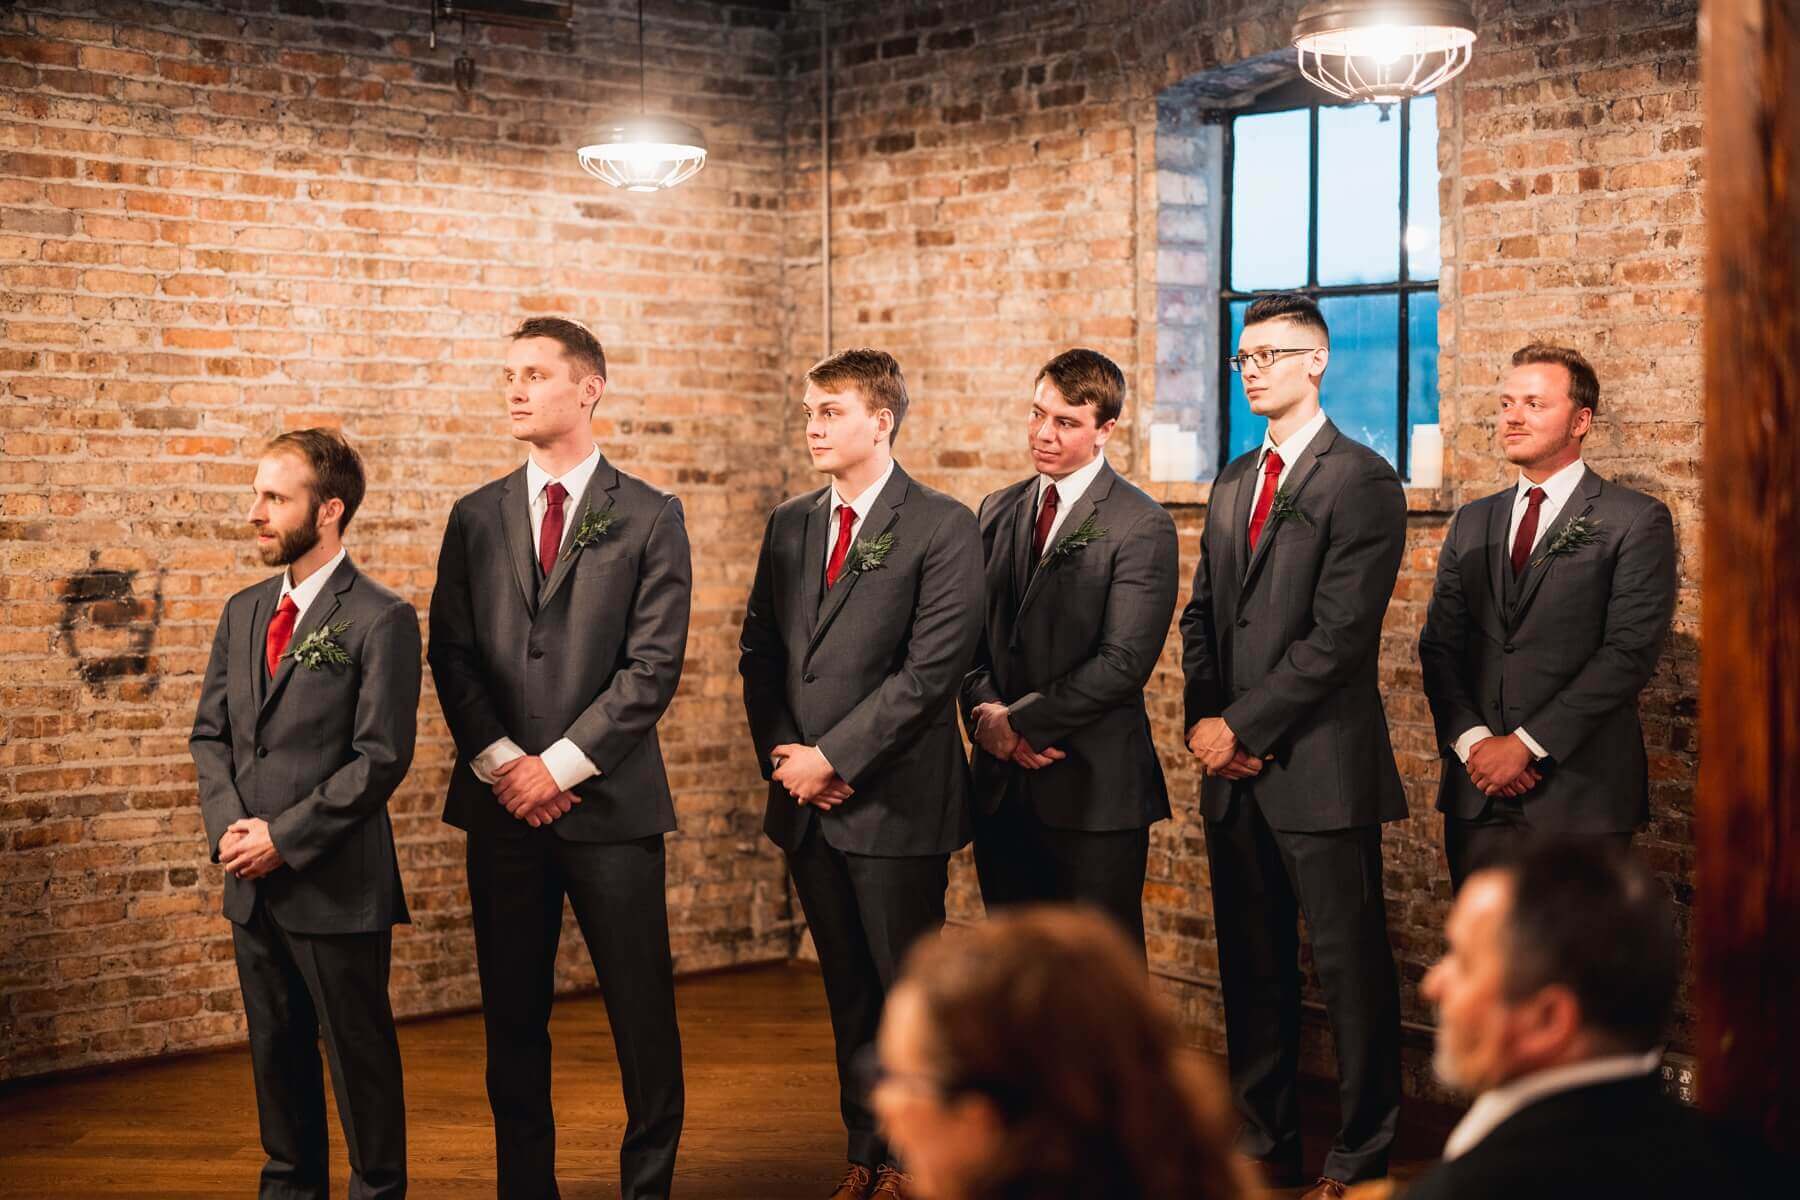 Groomsmen wearing gray suits at wedding venue in Illinois